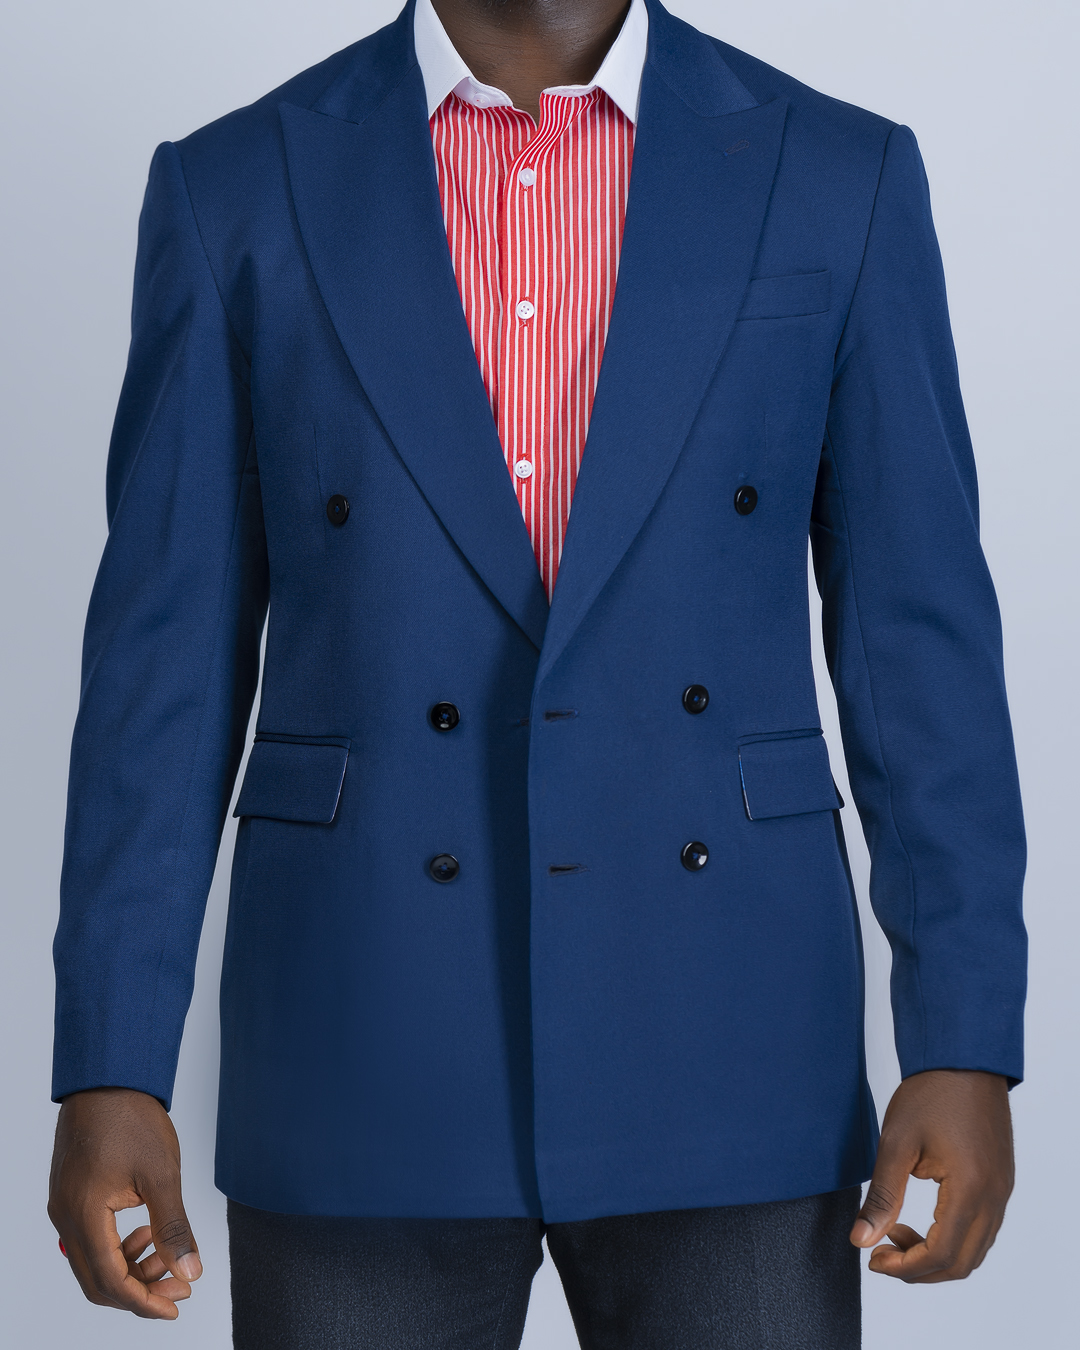 Blue double breasted dinner suit – Mr FEN BRAND